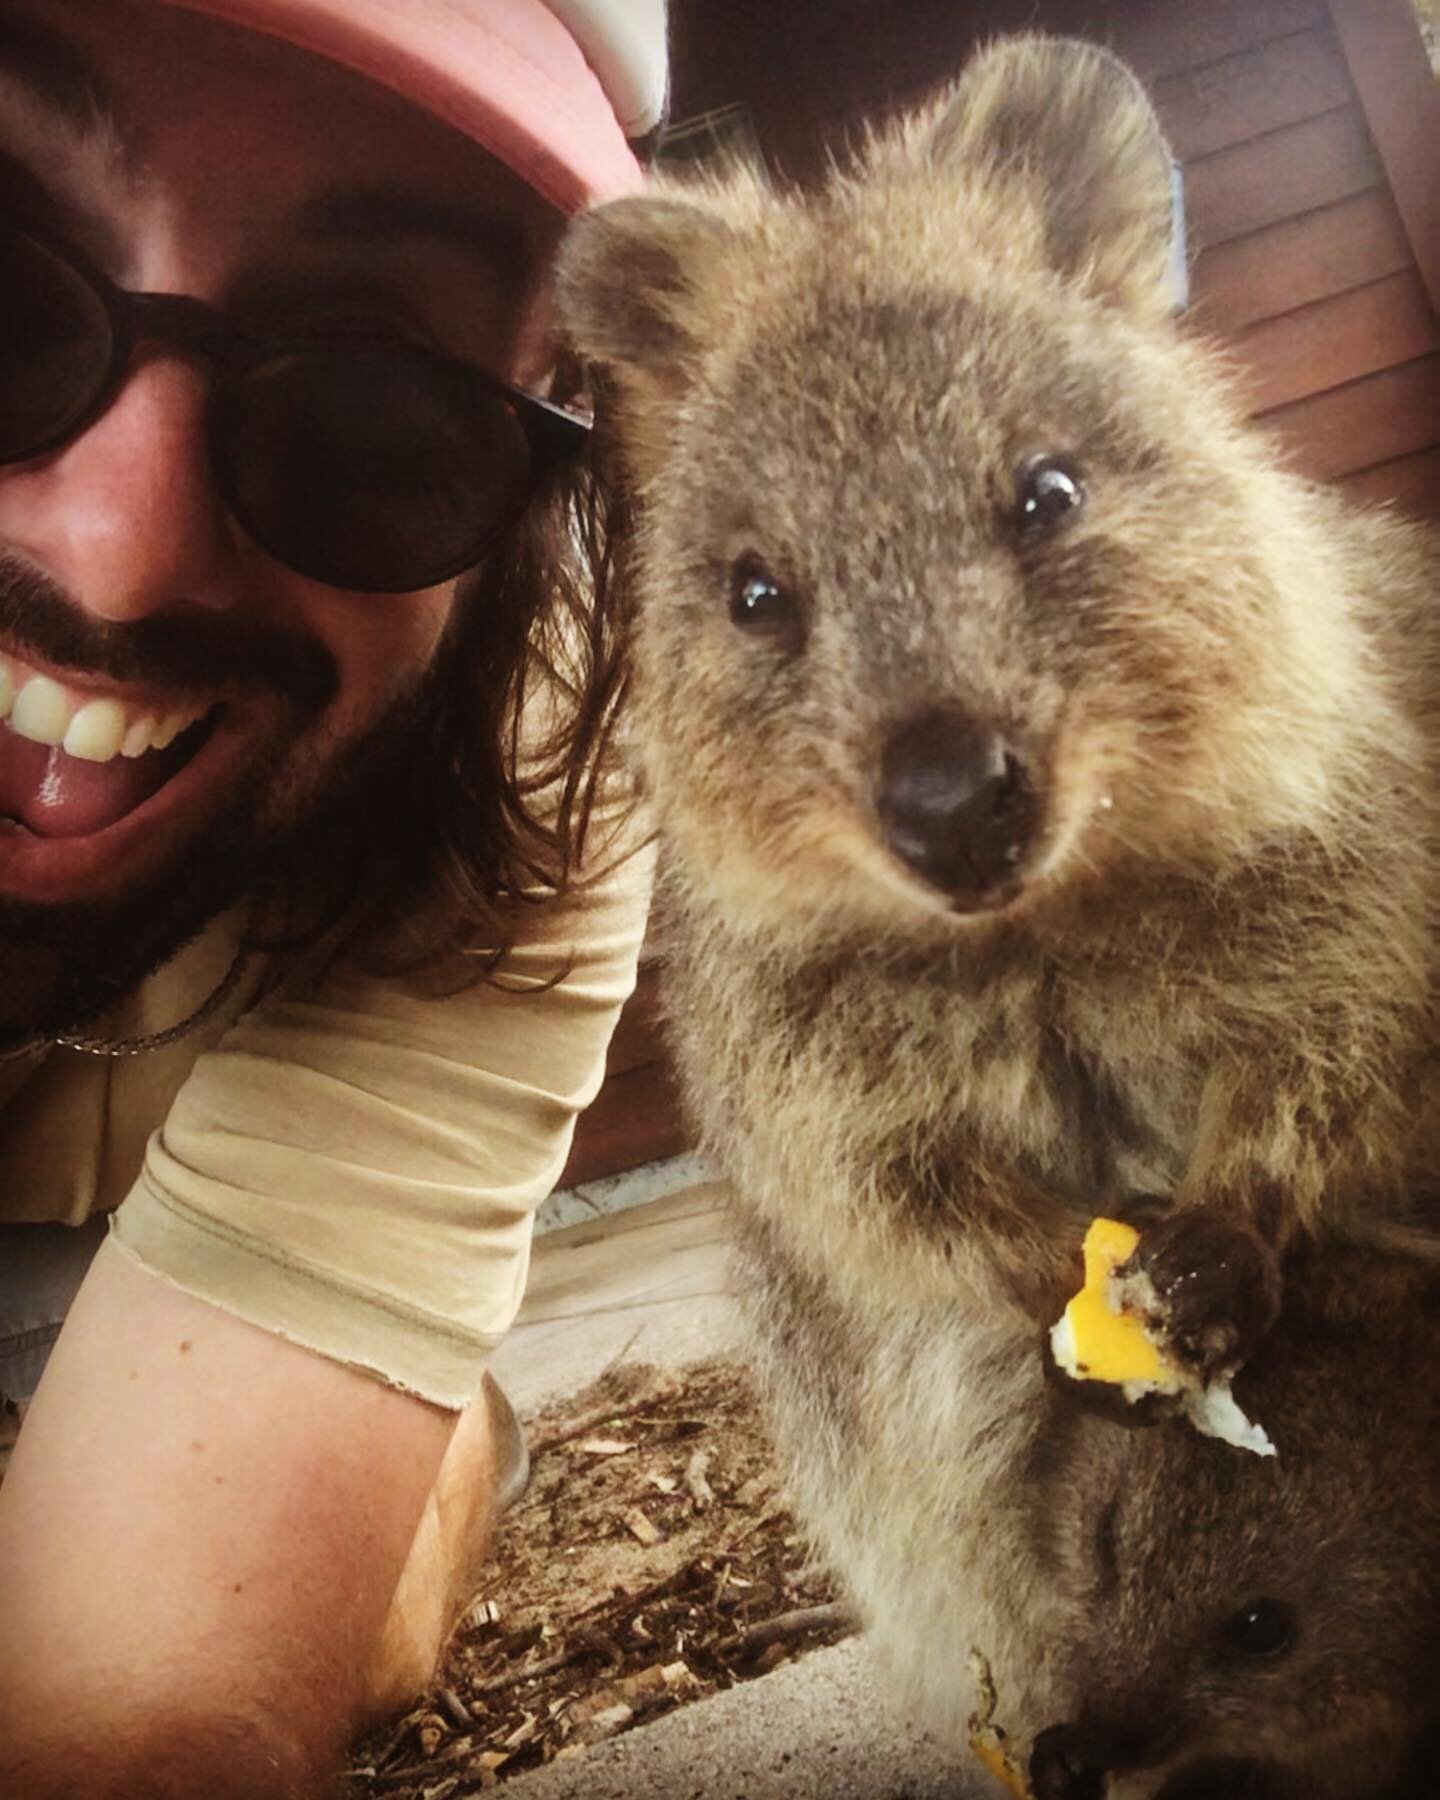 These little Aussie legends are the most ridiculously friendly creatures. This #quokka has a joey in its pouch and was enjoying some lemon peel it found on the ground. Thank you #rottnessisland for the insane beauty and relax time with @kaityjo89